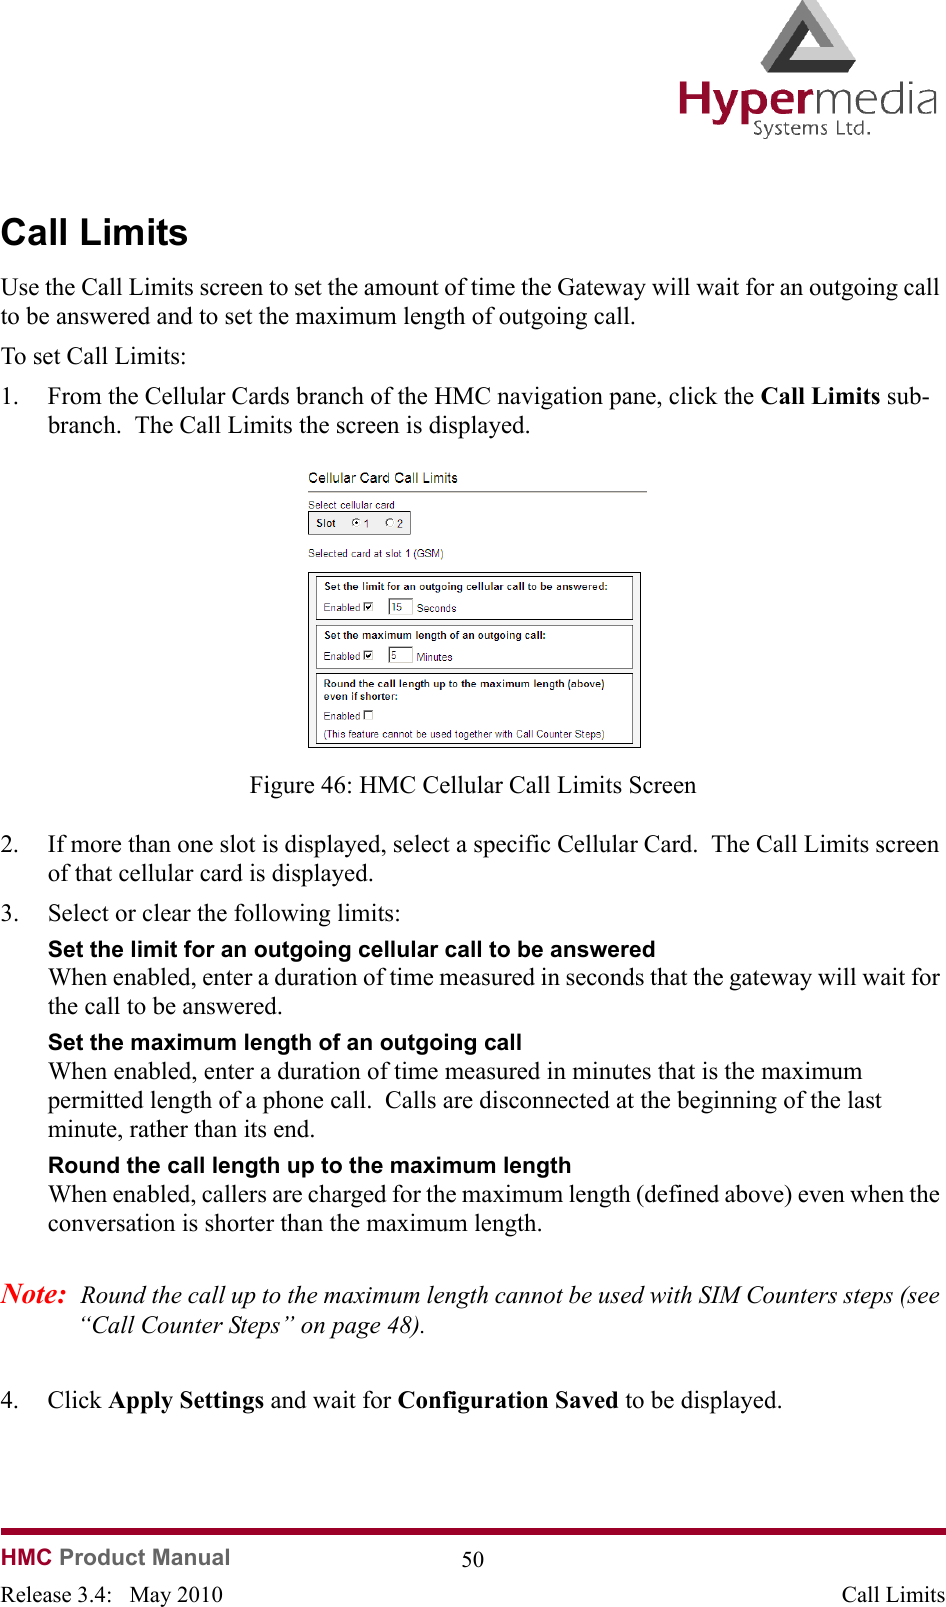   HMC Product Manual  50Release 3.4:   May 2010 Call LimitsCall LimitsUse the Call Limits screen to set the amount of time the Gateway will wait for an outgoing call to be answered and to set the maximum length of outgoing call.To set Call Limits:1. From the Cellular Cards branch of the HMC navigation pane, click the Call Limits sub-branch.  The Call Limits the screen is displayed.              Figure 46: HMC Cellular Call Limits Screen2. If more than one slot is displayed, select a specific Cellular Card.  The Call Limits screen of that cellular card is displayed.3. Select or clear the following limits:Set the limit for an outgoing cellular call to be answeredWhen enabled, enter a duration of time measured in seconds that the gateway will wait for the call to be answered.Set the maximum length of an outgoing call  When enabled, enter a duration of time measured in minutes that is the maximum permitted length of a phone call.  Calls are disconnected at the beginning of the last minute, rather than its end.Round the call length up to the maximum length When enabled, callers are charged for the maximum length (defined above) even when the conversation is shorter than the maximum length.Note:  Round the call up to the maximum length cannot be used with SIM Counters steps (see “Call Counter Steps” on page 48).4. Click Apply Settings and wait for Configuration Saved to be displayed.